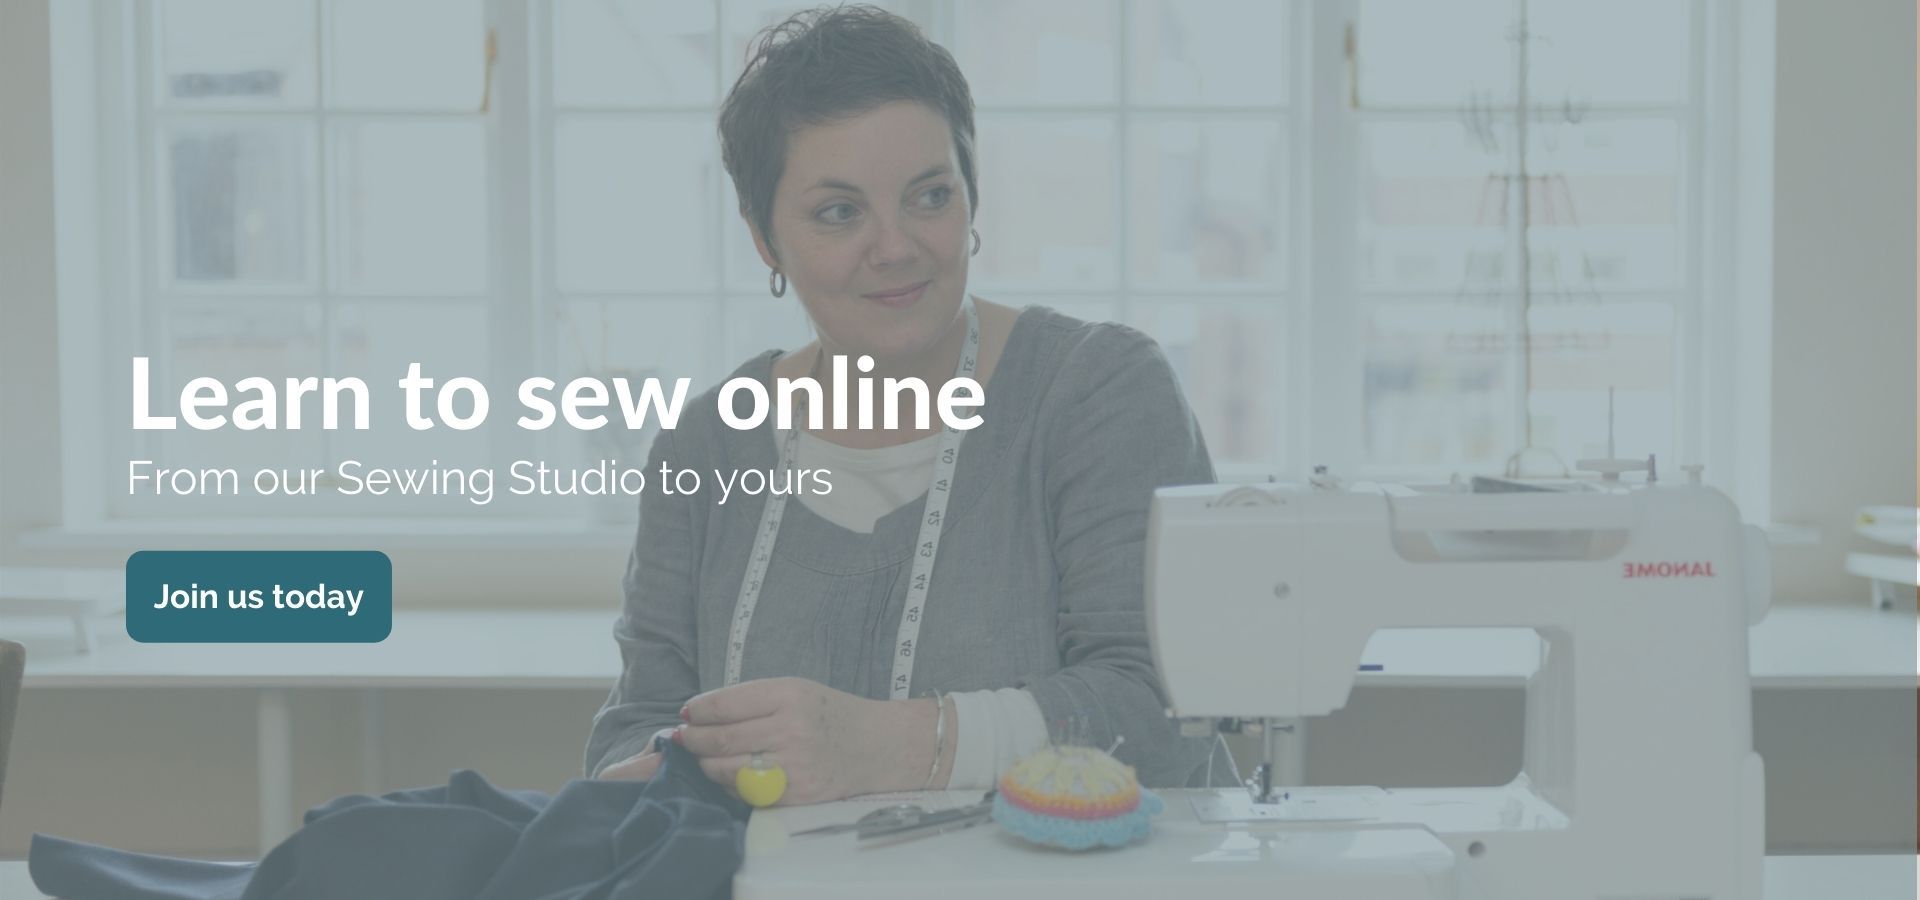 Learn to sew online, online sewing classes, online sewing courses